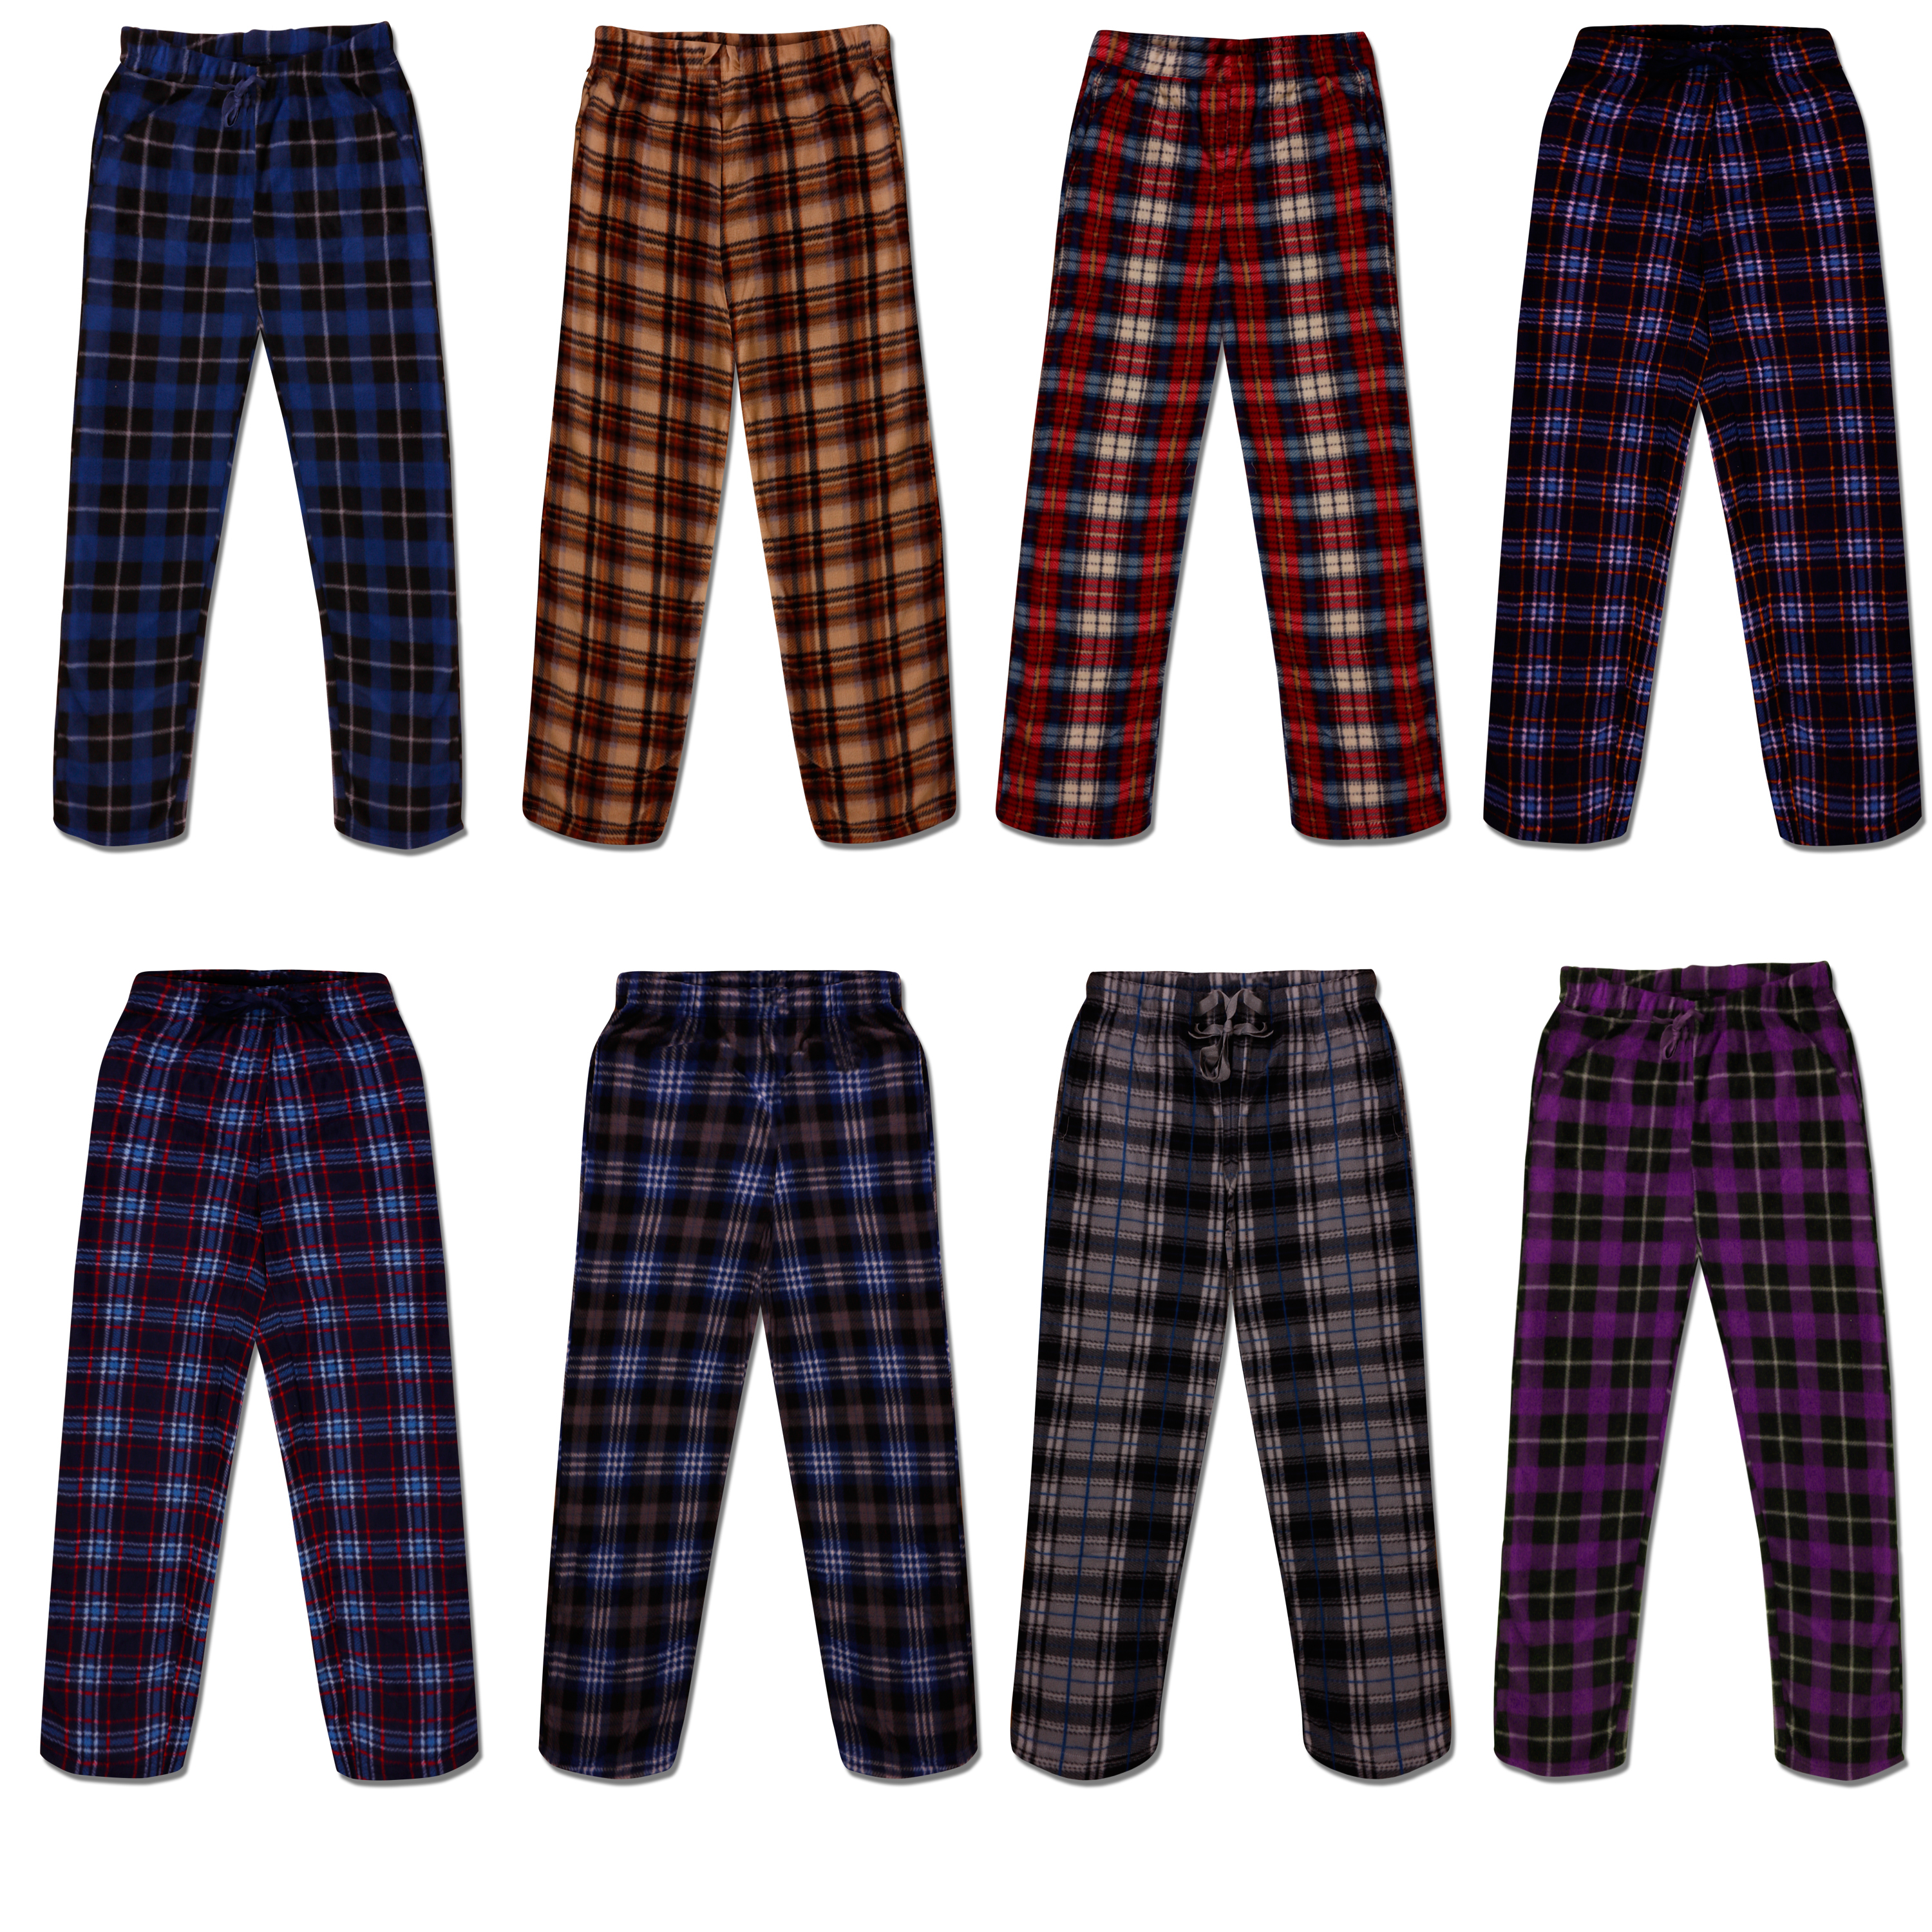 Multi-Pack: Men's Ultra Soft Flannel Plaid Pajama Lounge Pants - 3-Pack, XX-Large